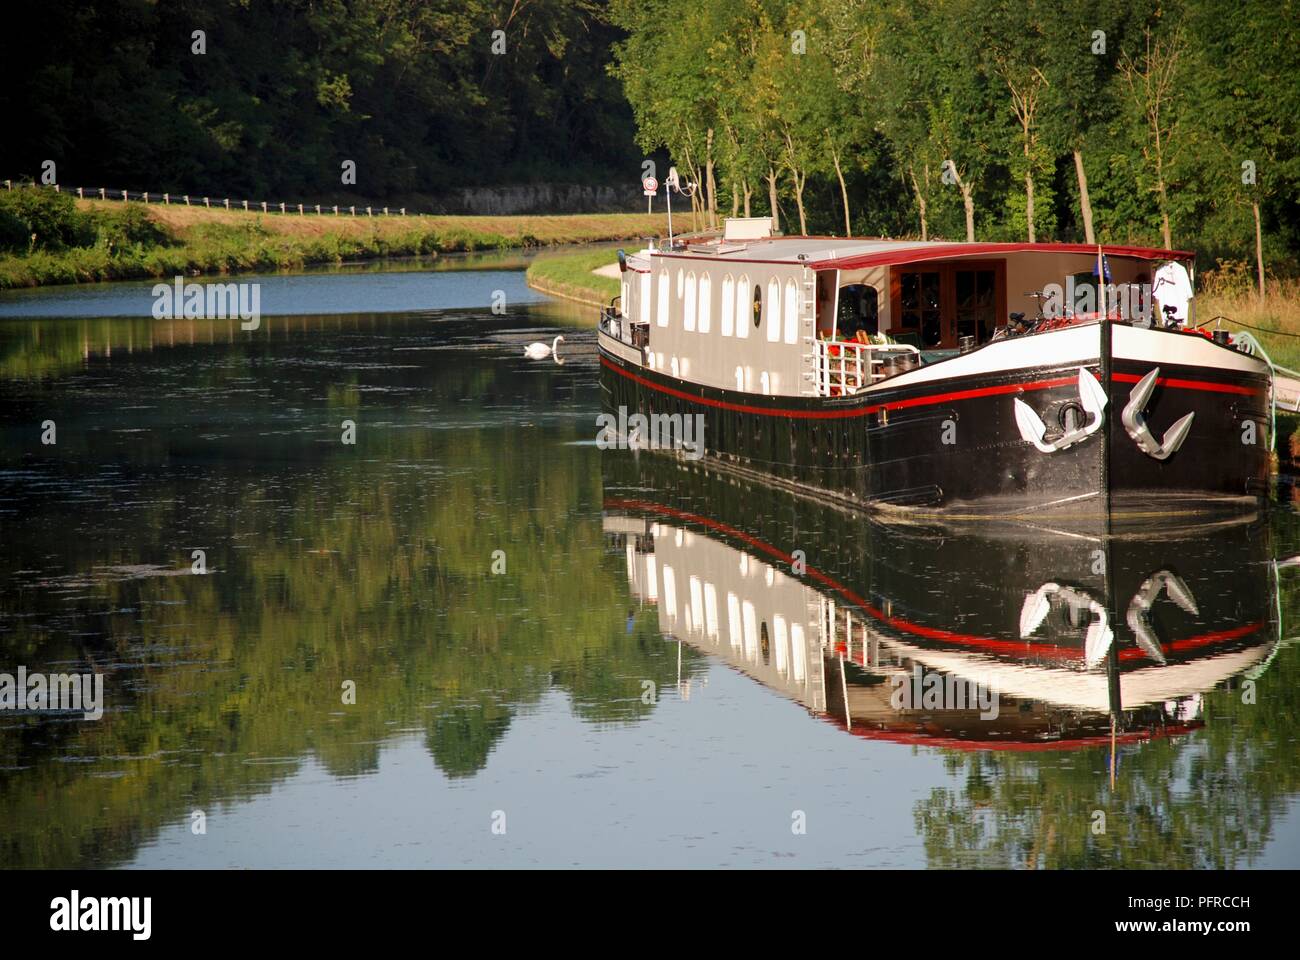 France, Burgundy, canal boat on the Burgundy Canal (Canal de Bourgogne) at Buffon Stock Photo